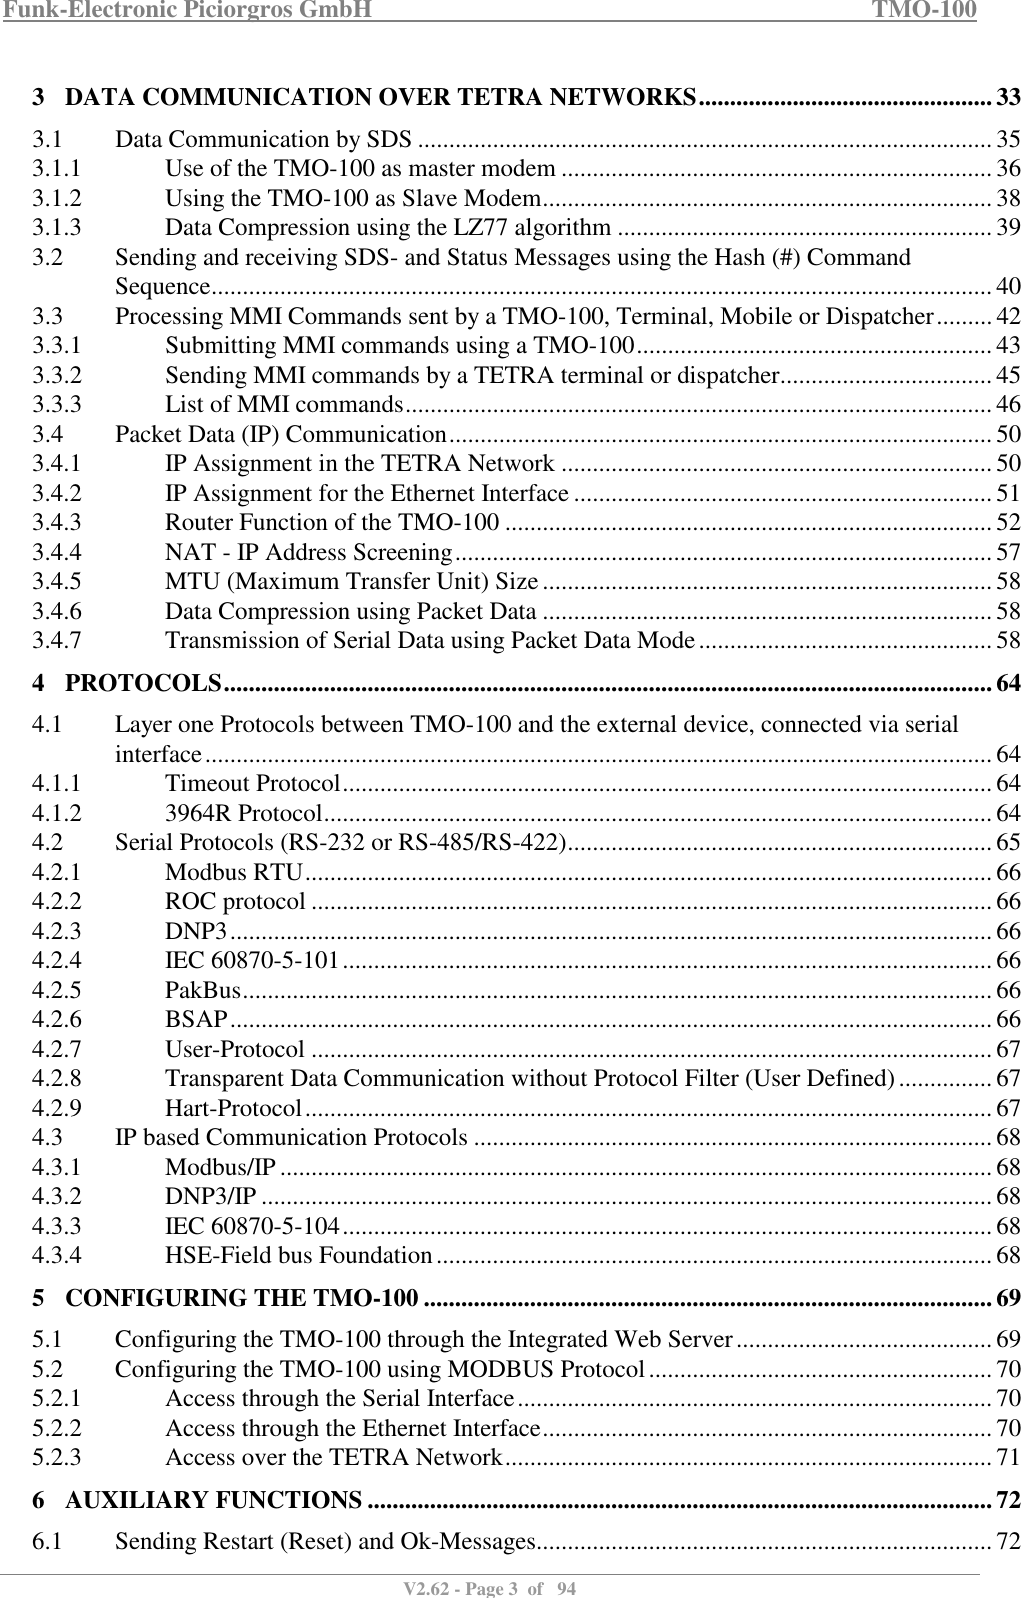 Funk-Electronic Piciorgros GmbH   TMO-100   V2.62 - Page 3  of   94   3 DATA COMMUNICATION OVER TETRA NETWORKS ............................................... 33 3.1  Data Communication by SDS ............................................................................................ 35 3.1.1  Use of the TMO-100 as master modem ..................................................................... 36 3.1.2  Using the TMO-100 as Slave Modem ........................................................................ 38 3.1.3  Data Compression using the LZ77 algorithm ............................................................ 39 3.2  Sending and receiving SDS- and Status Messages using the Hash (#) Command Sequence ............................................................................................................................. 40 3.3  Processing MMI Commands sent by a TMO-100, Terminal, Mobile or Dispatcher ......... 42 3.3.1  Submitting MMI commands using a TMO-100 ......................................................... 43 3.3.2  Sending MMI commands by a TETRA terminal or dispatcher .................................. 45 3.3.3  List of MMI commands .............................................................................................. 46 3.4  Packet Data (IP) Communication ....................................................................................... 50 3.4.1  IP Assignment in the TETRA Network ..................................................................... 50 3.4.2  IP Assignment for the Ethernet Interface ................................................................... 51 3.4.3  Router Function of the TMO-100 .............................................................................. 52 3.4.4  NAT - IP Address Screening ...................................................................................... 57 3.4.5  MTU (Maximum Transfer Unit) Size ........................................................................ 58 3.4.6  Data Compression using Packet Data ........................................................................ 58 3.4.7  Transmission of Serial Data using Packet Data Mode ............................................... 58 4 PROTOCOLS ........................................................................................................................... 64 4.1  Layer one Protocols between TMO-100 and the external device, connected via serial interface .............................................................................................................................. 64 4.1.1  Timeout Protocol ........................................................................................................ 64 4.1.2  3964R Protocol ........................................................................................................... 64 4.2  Serial Protocols (RS-232 or RS-485/RS-422) .................................................................... 65 4.2.1  Modbus RTU .............................................................................................................. 66 4.2.2  ROC protocol ............................................................................................................. 66 4.2.3  DNP3 .......................................................................................................................... 66 4.2.4  IEC 60870-5-101 ........................................................................................................ 66 4.2.5  PakBus ........................................................................................................................ 66 4.2.6  BSAP .......................................................................................................................... 66 4.2.7  User-Protocol ............................................................................................................. 67 4.2.8  Transparent Data Communication without Protocol Filter (User Defined) ............... 67 4.2.9  Hart-Protocol .............................................................................................................. 67 4.3  IP based Communication Protocols ................................................................................... 68 4.3.1  Modbus/IP .................................................................................................................. 68 4.3.2  DNP3/IP ..................................................................................................................... 68 4.3.3  IEC 60870-5-104 ........................................................................................................ 68 4.3.4  HSE-Field bus Foundation ......................................................................................... 68 5 CONFIGURING THE TMO-100 ........................................................................................... 69 5.1  Configuring the TMO-100 through the Integrated Web Server ......................................... 69 5.2  Configuring the TMO-100 using MODBUS Protocol ....................................................... 70 5.2.1  Access through the Serial Interface ............................................................................ 70 5.2.2  Access through the Ethernet Interface ........................................................................ 70 5.2.3  Access over the TETRA Network .............................................................................. 71 6 AUXILIARY FUNCTIONS .................................................................................................... 72 6.1  Sending Restart (Reset) and Ok-Messages......................................................................... 72 